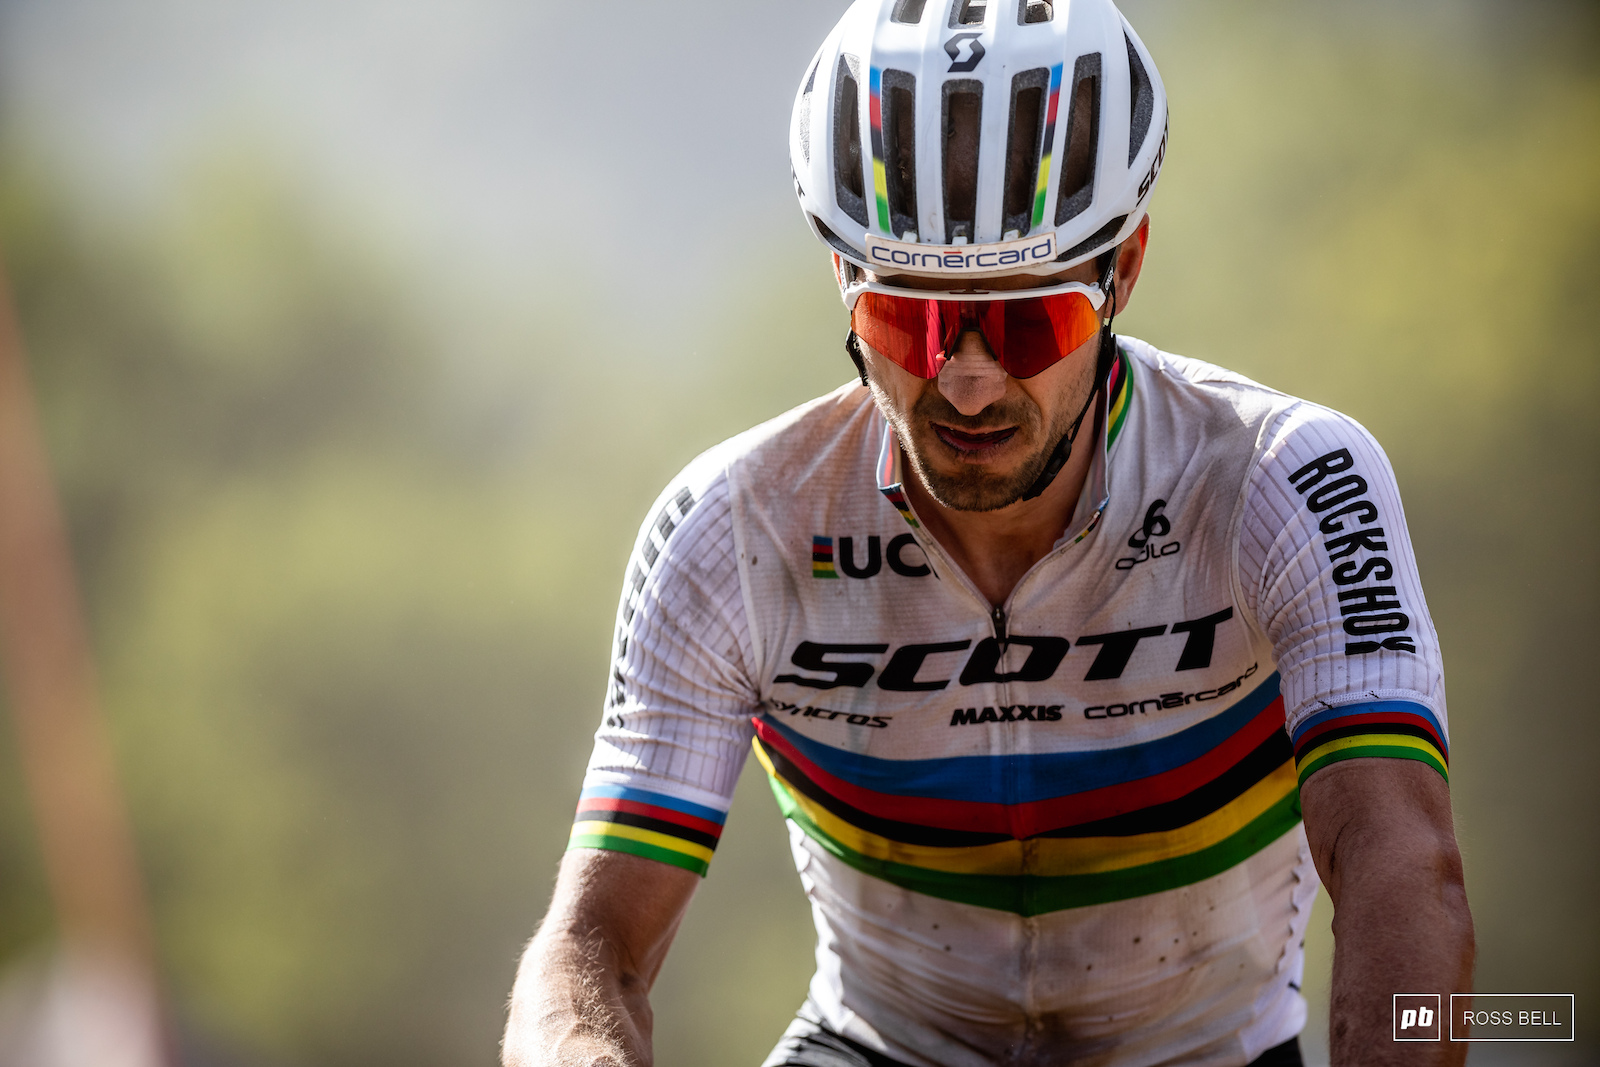 The wait for that record breaking win goes onto 2023 for Nino Schurter.